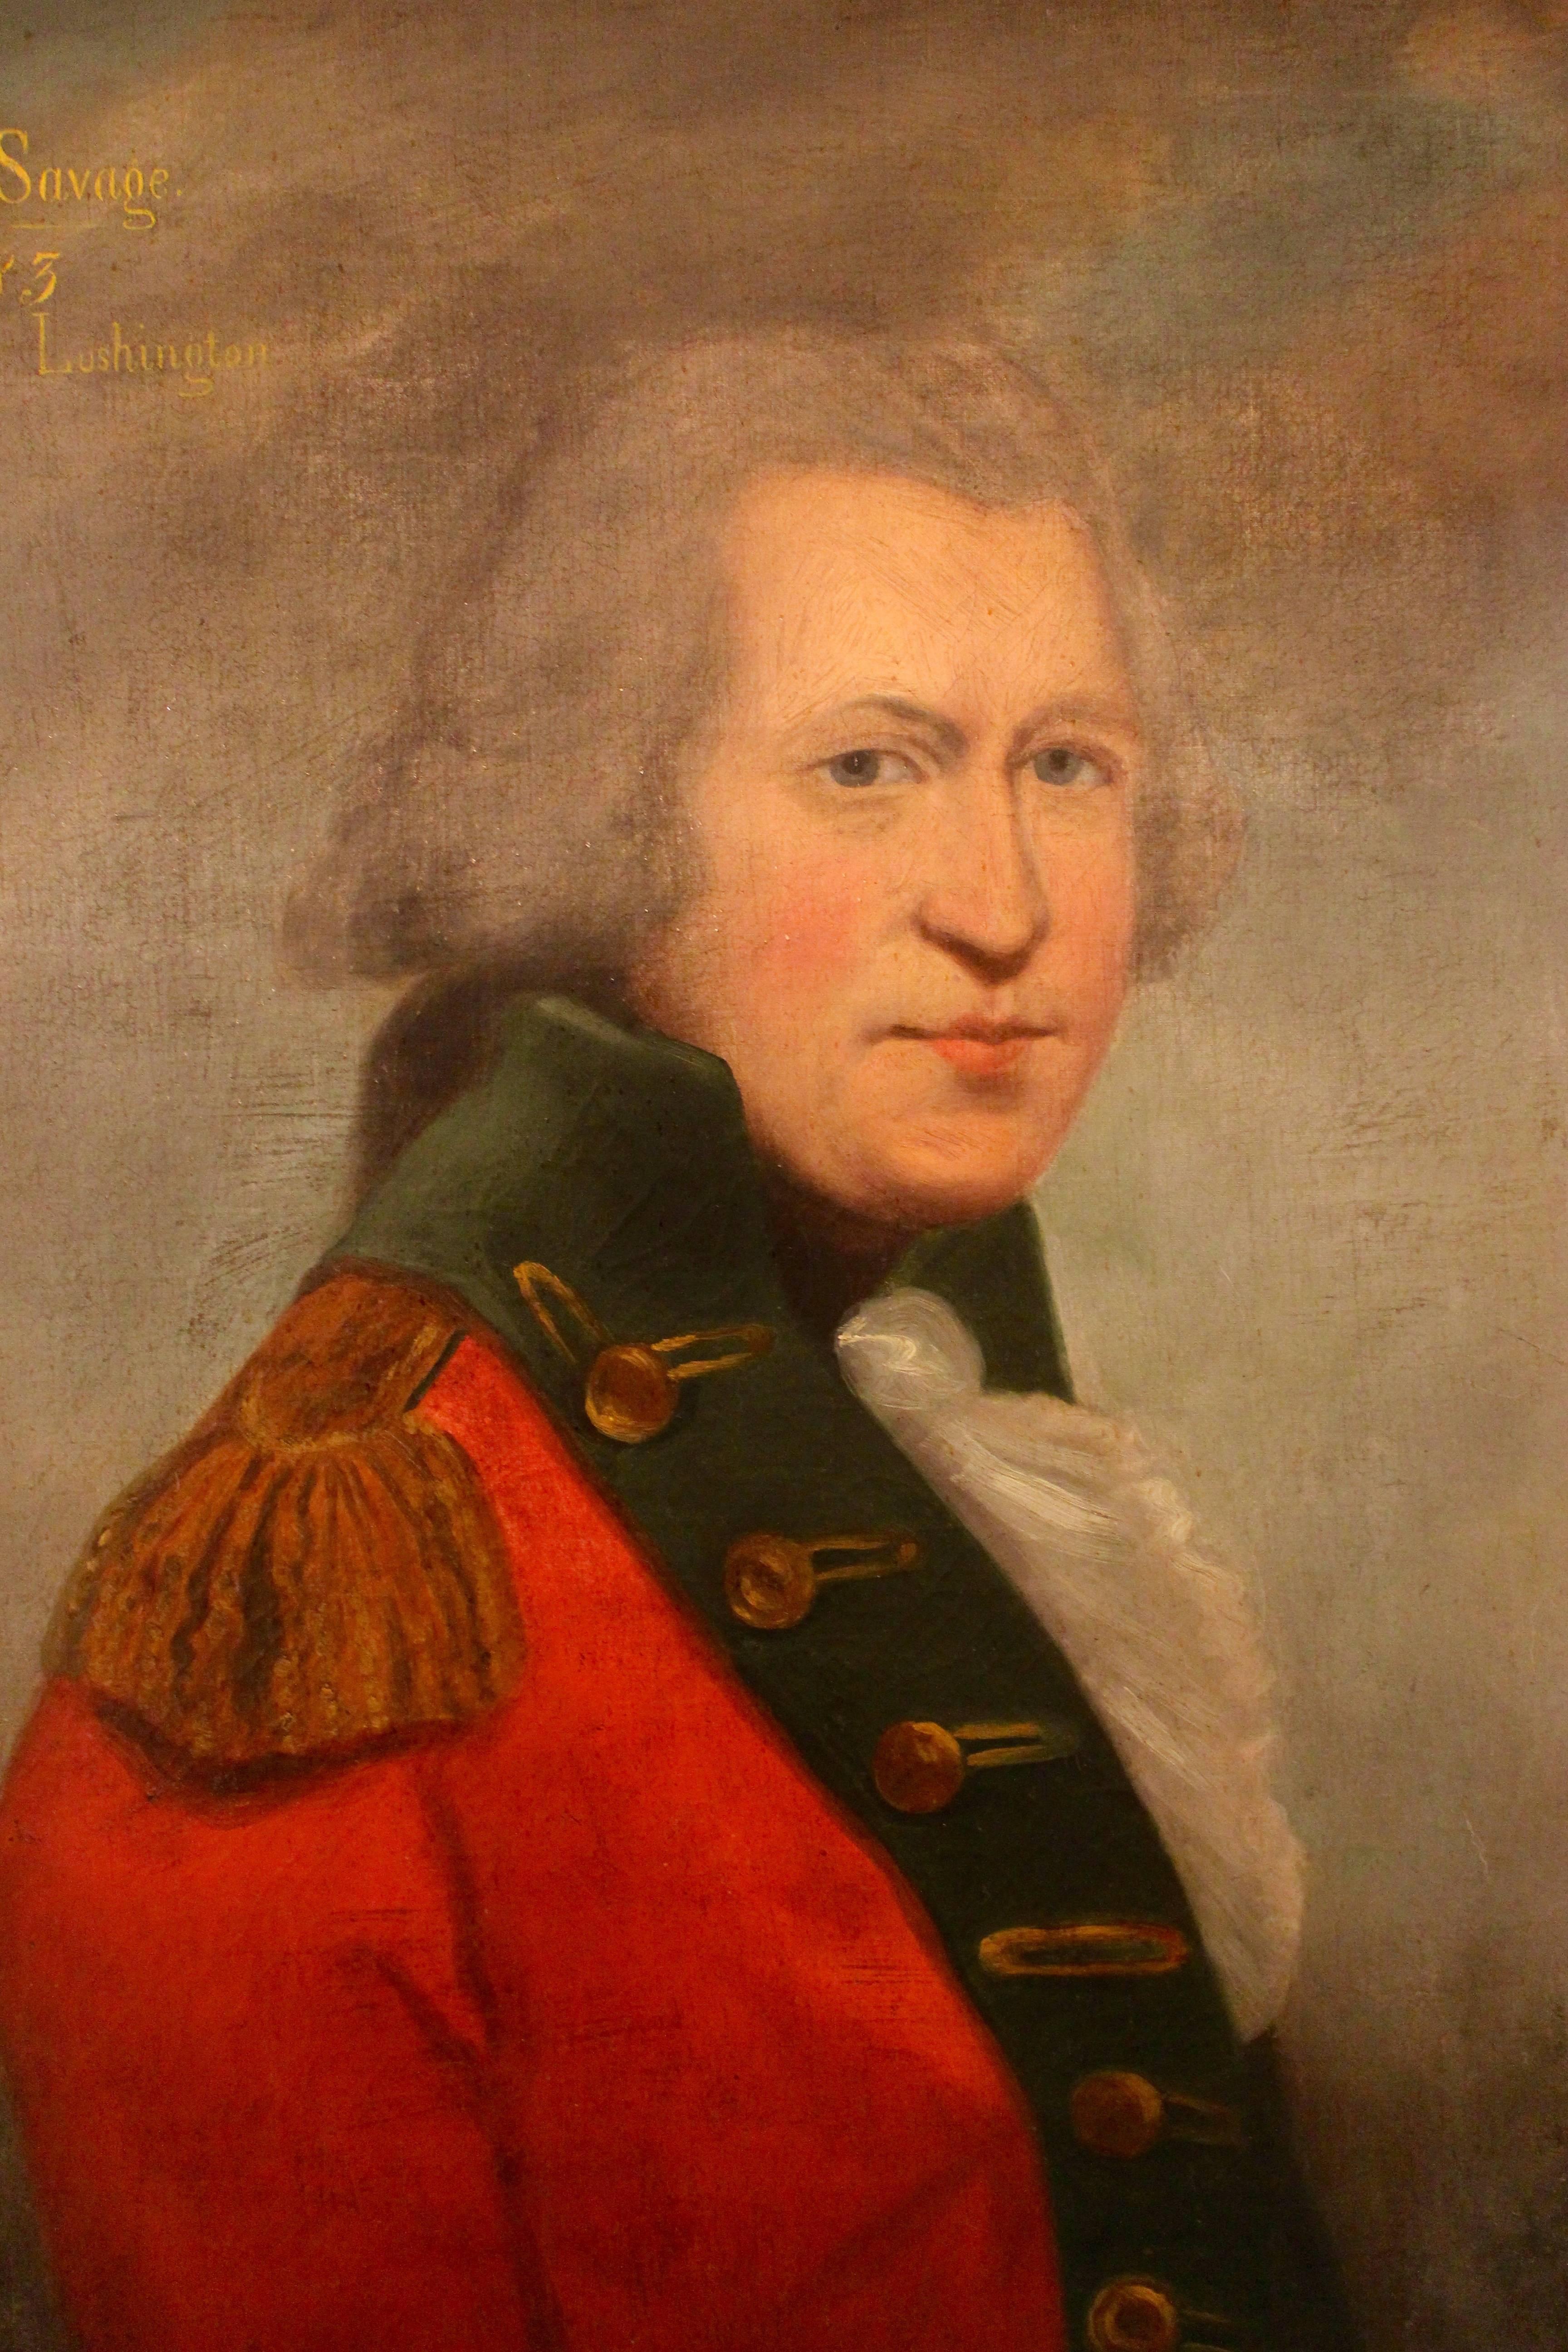 A late 18th century oil on canvas painting of a British Army officer, “Major Charles Savage”. In this half-length portrait the officer is wearing the traditional redcoat uniform of the British Army against a neutral backdrop. Dark blue facing on the